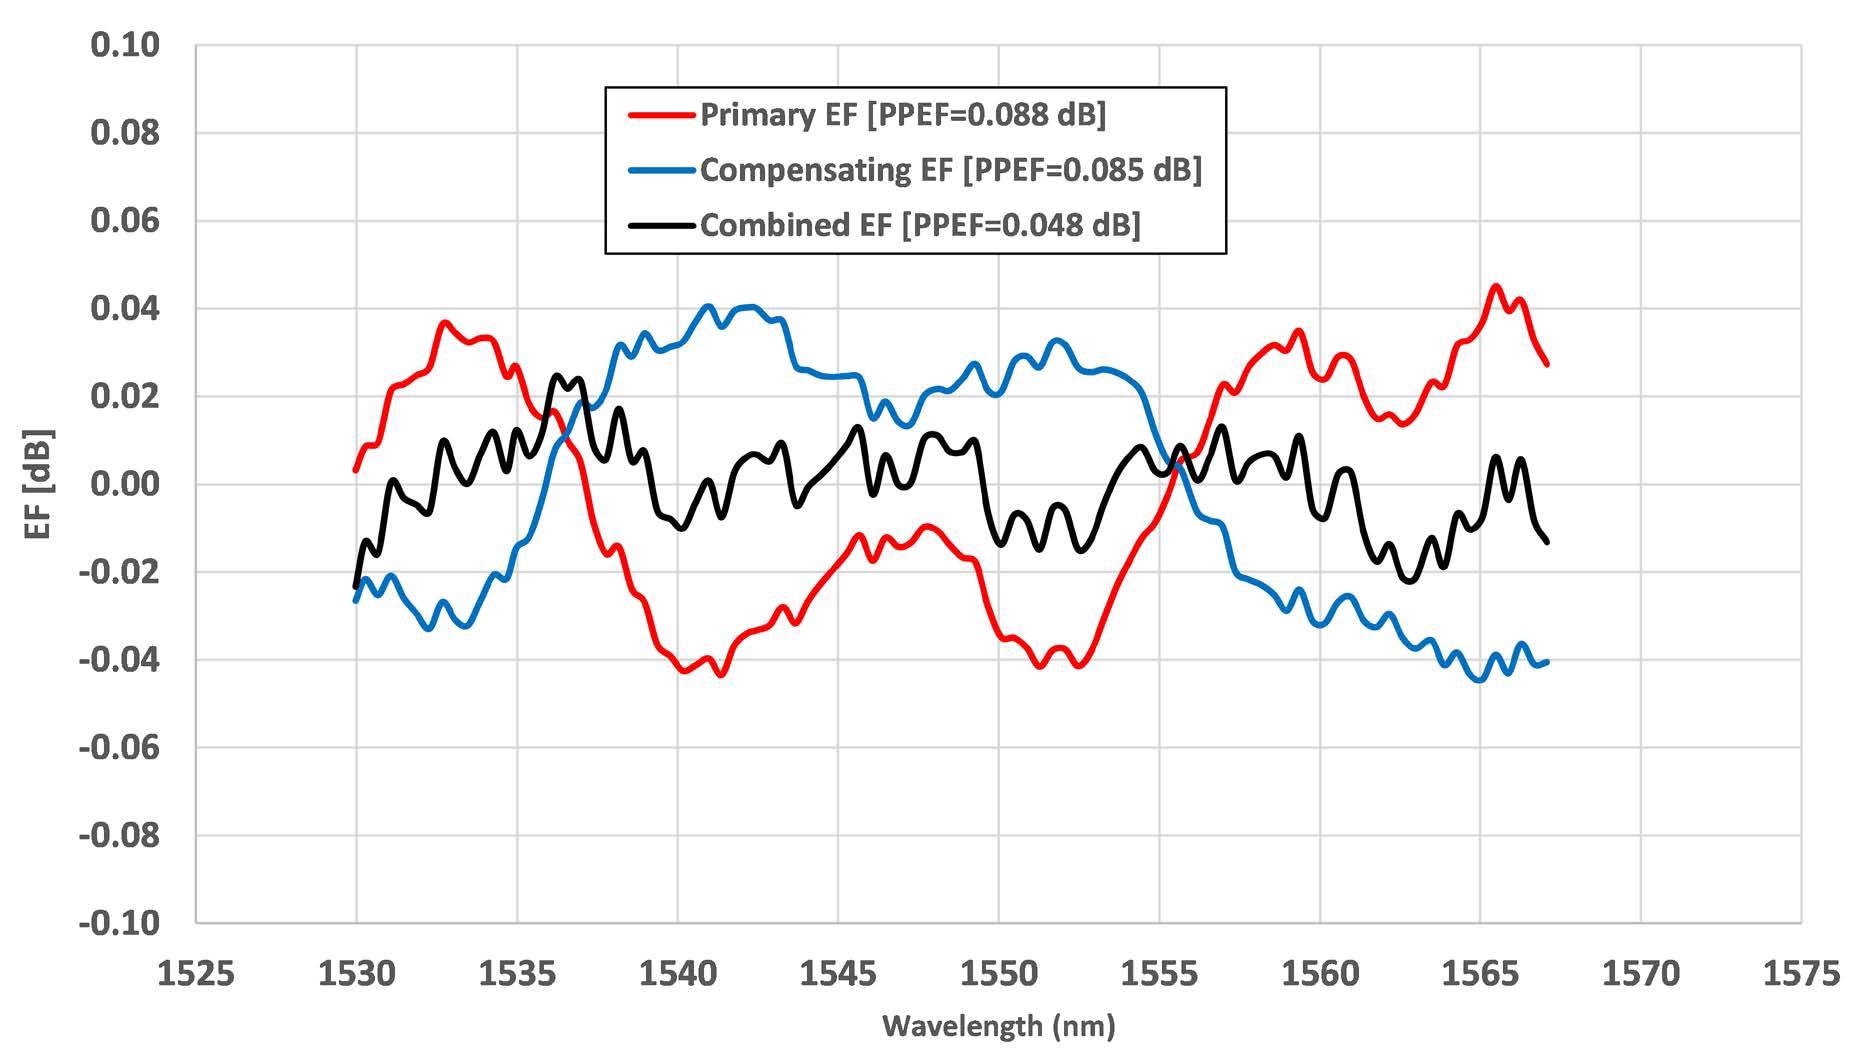 A PPEF compensation example showing the measured EF of a primary GFF (red) and a compensating GFF (blue), as well as their combined performance (black). The example depicted is equivalent to passing through